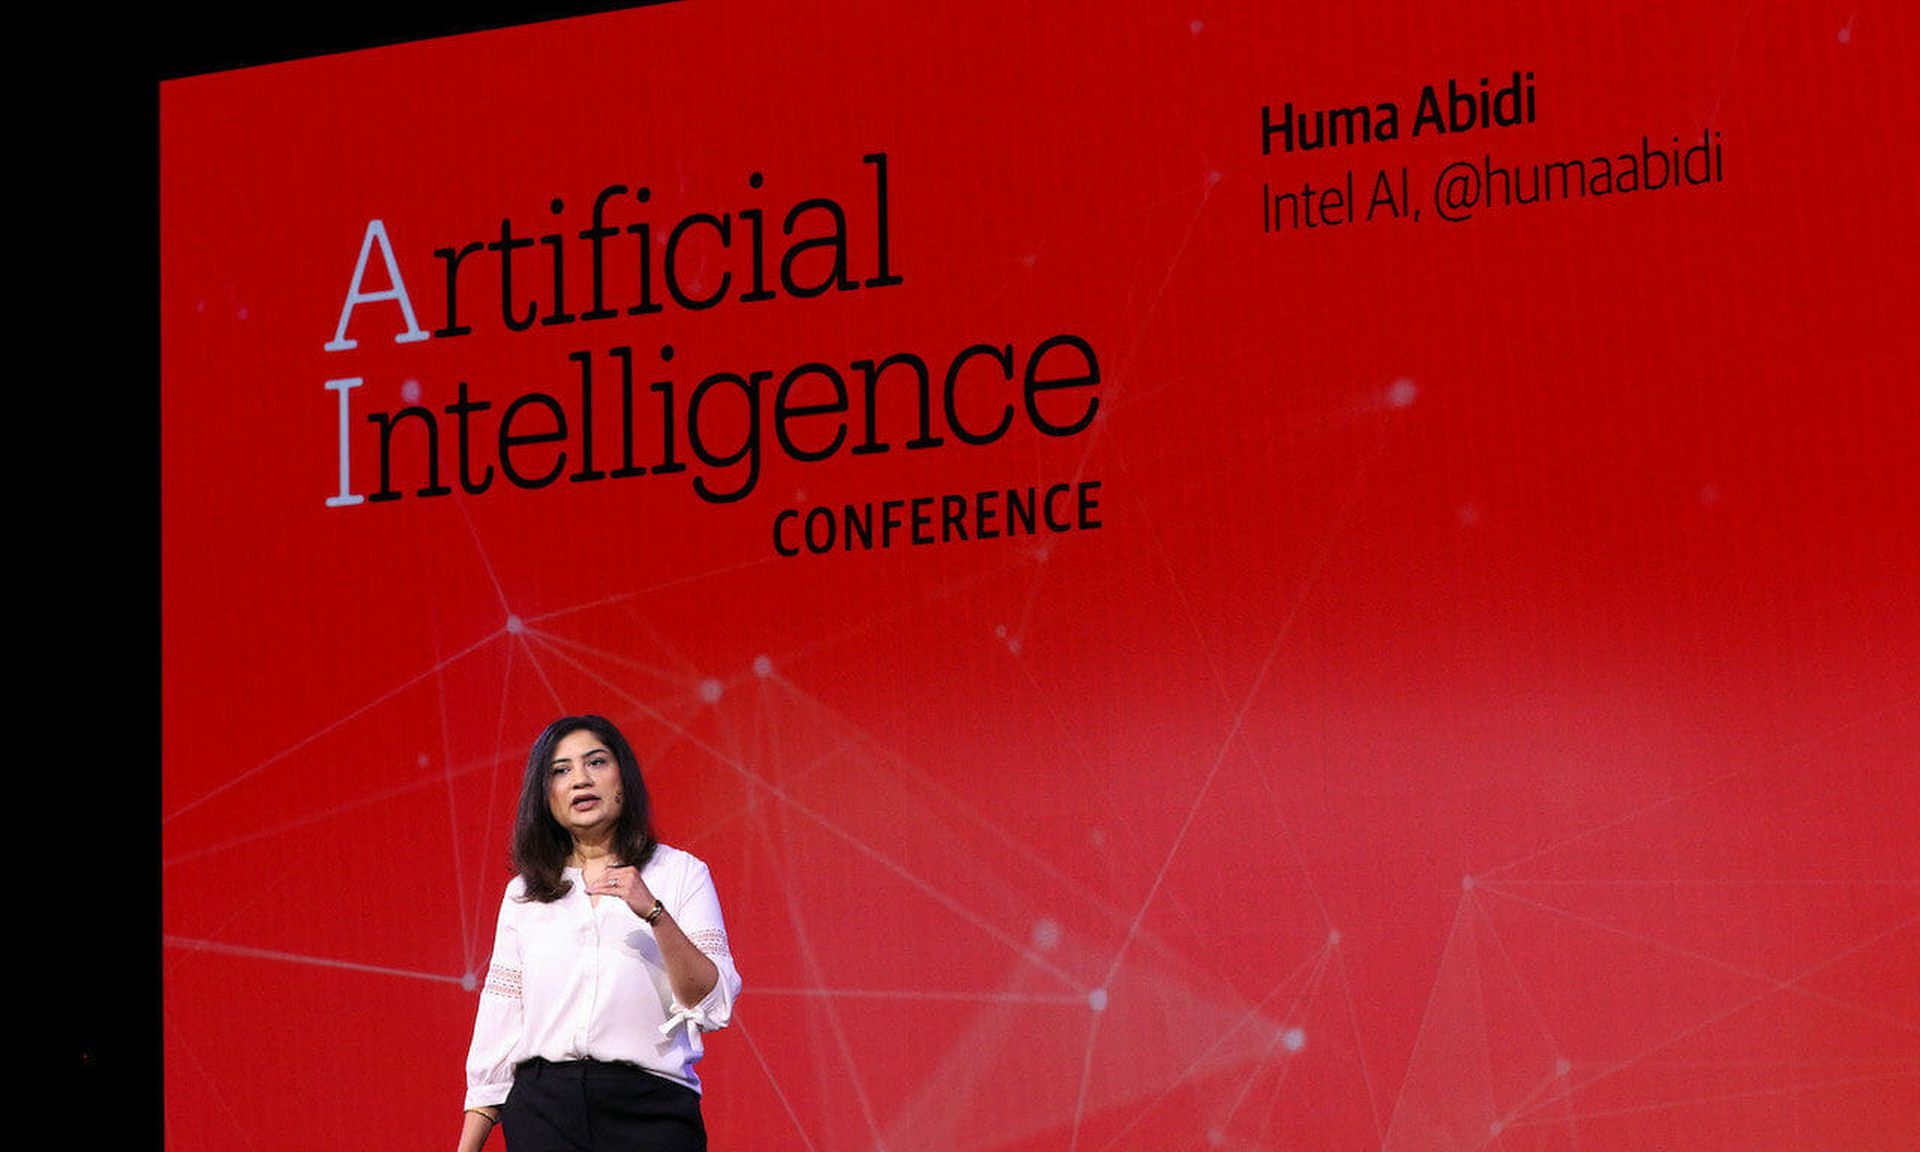 Huma Abidi of Intel speaks at the Artificial Intelligence Conference in San Francisco three years ago. Today’s columnist, Dave Anderson of Dynatrace, says AI-powered risk and impact analysis and remediation can deliver the visibility developers need to more effectively manage vulnerabilities.